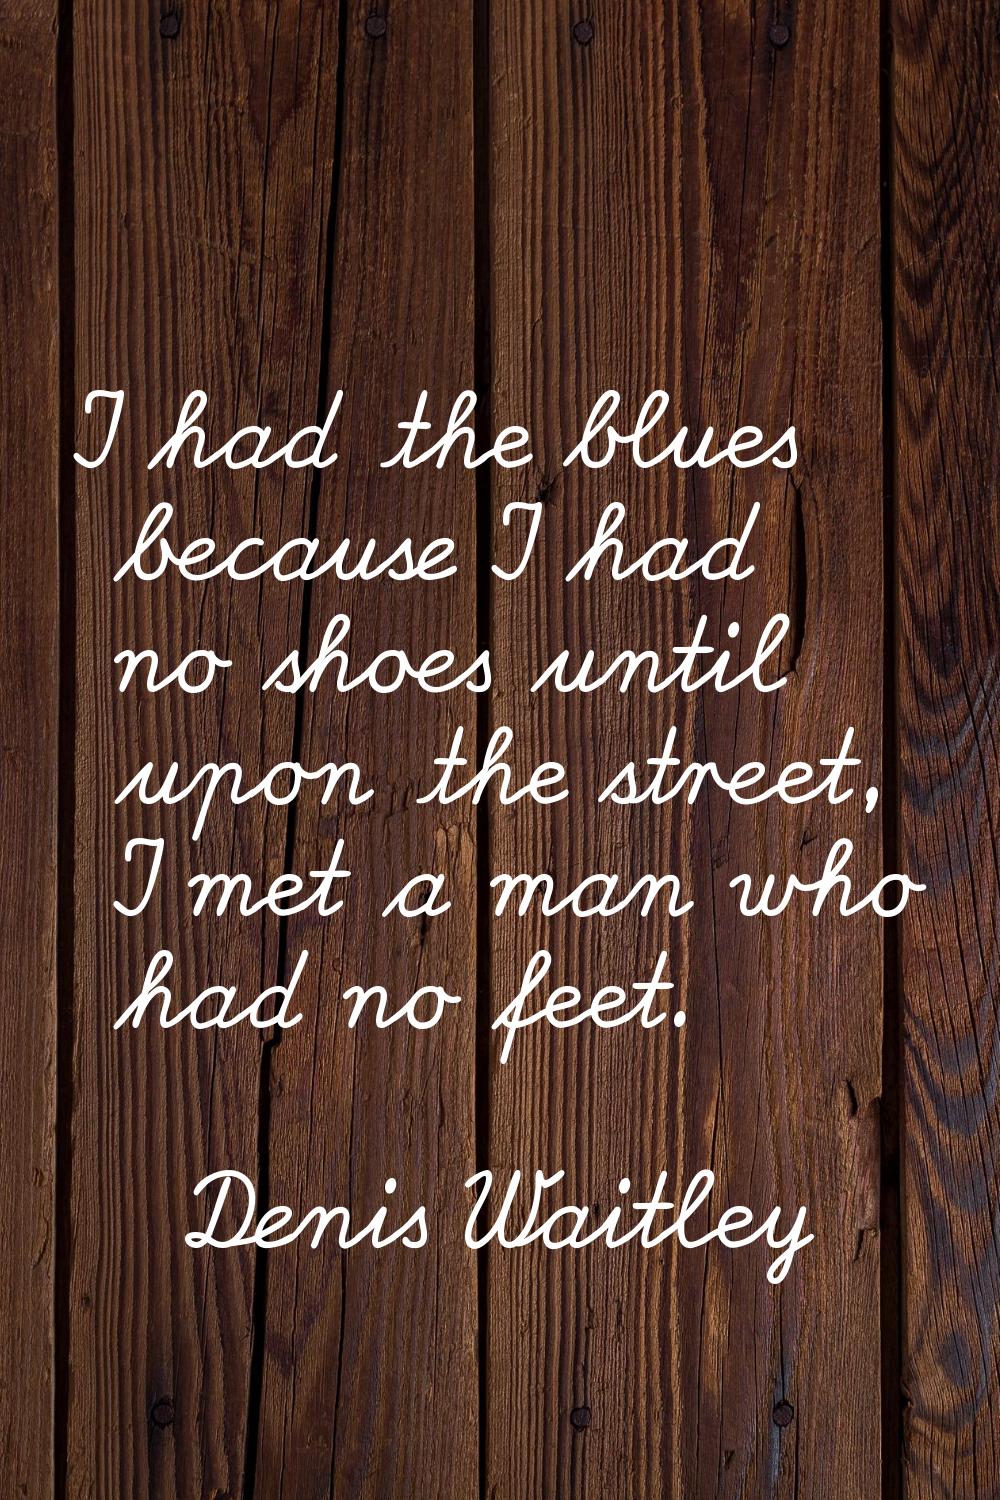 I had the blues because I had no shoes until upon the street, I met a man who had no feet.